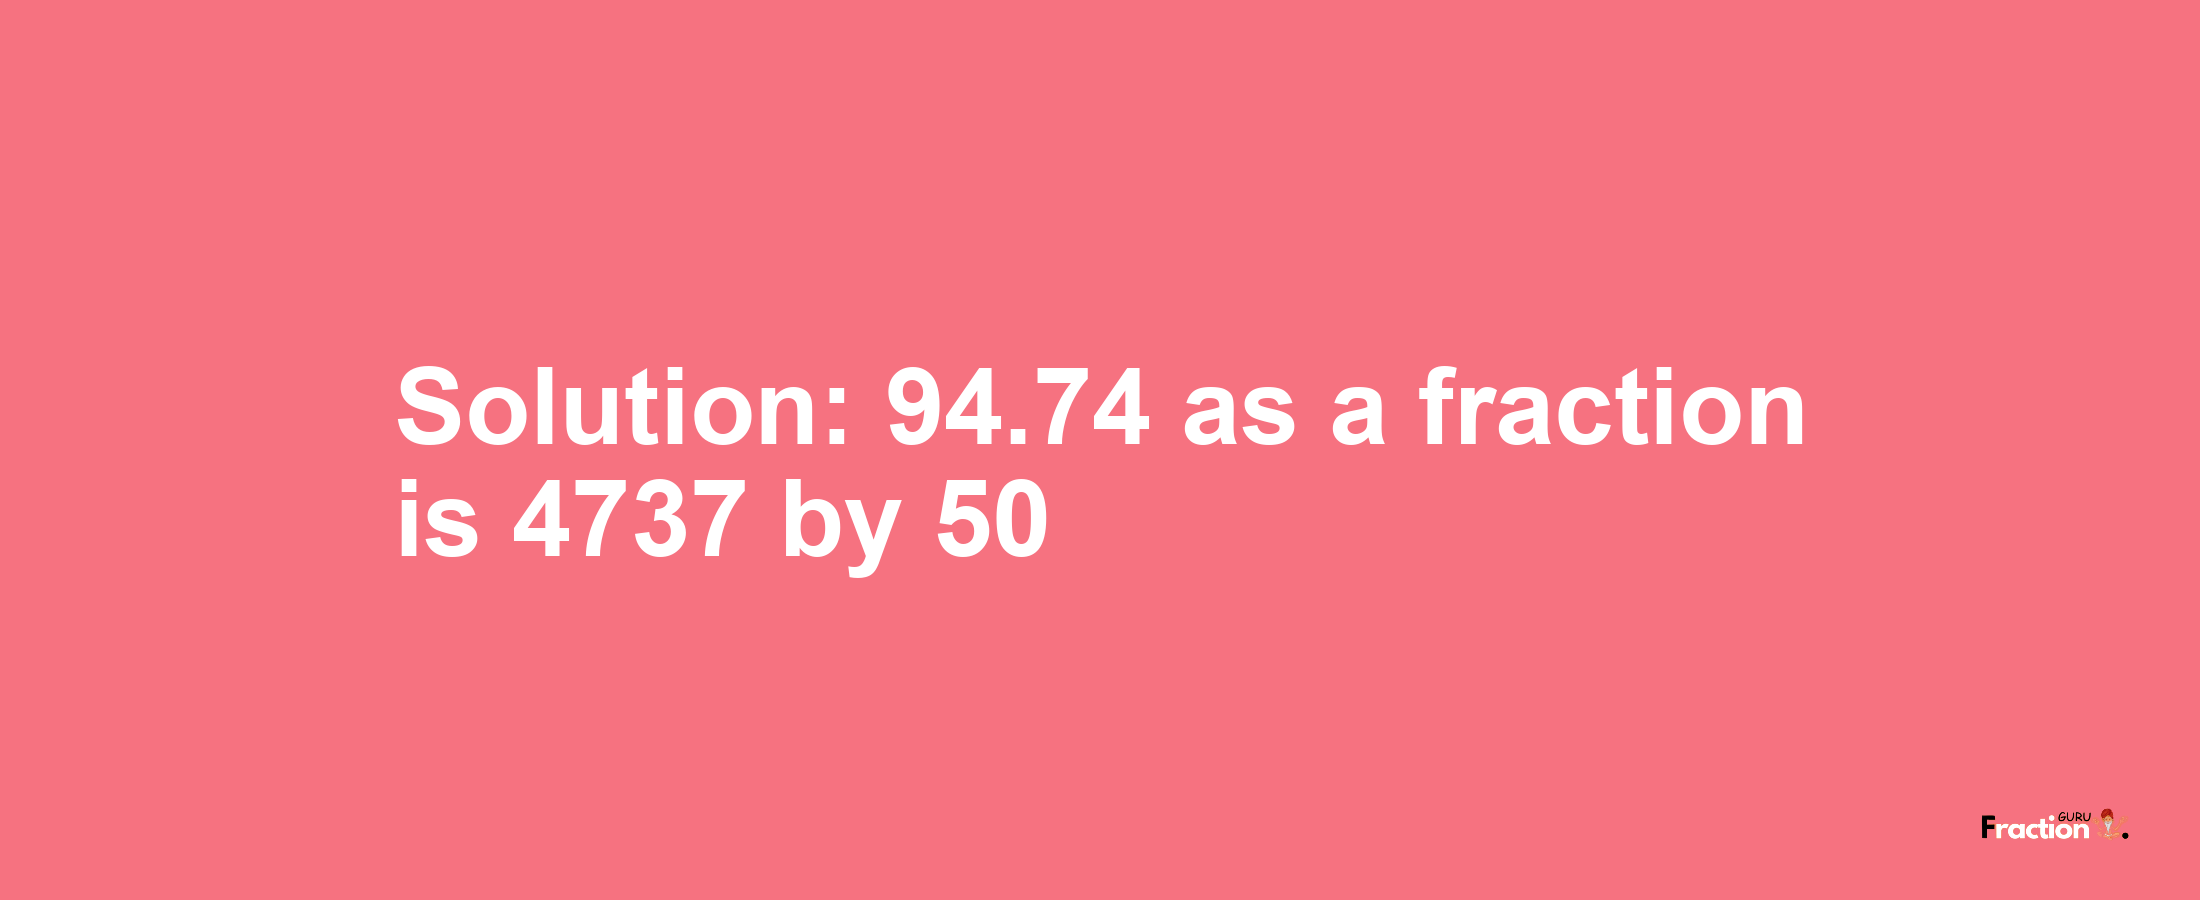 Solution:94.74 as a fraction is 4737/50